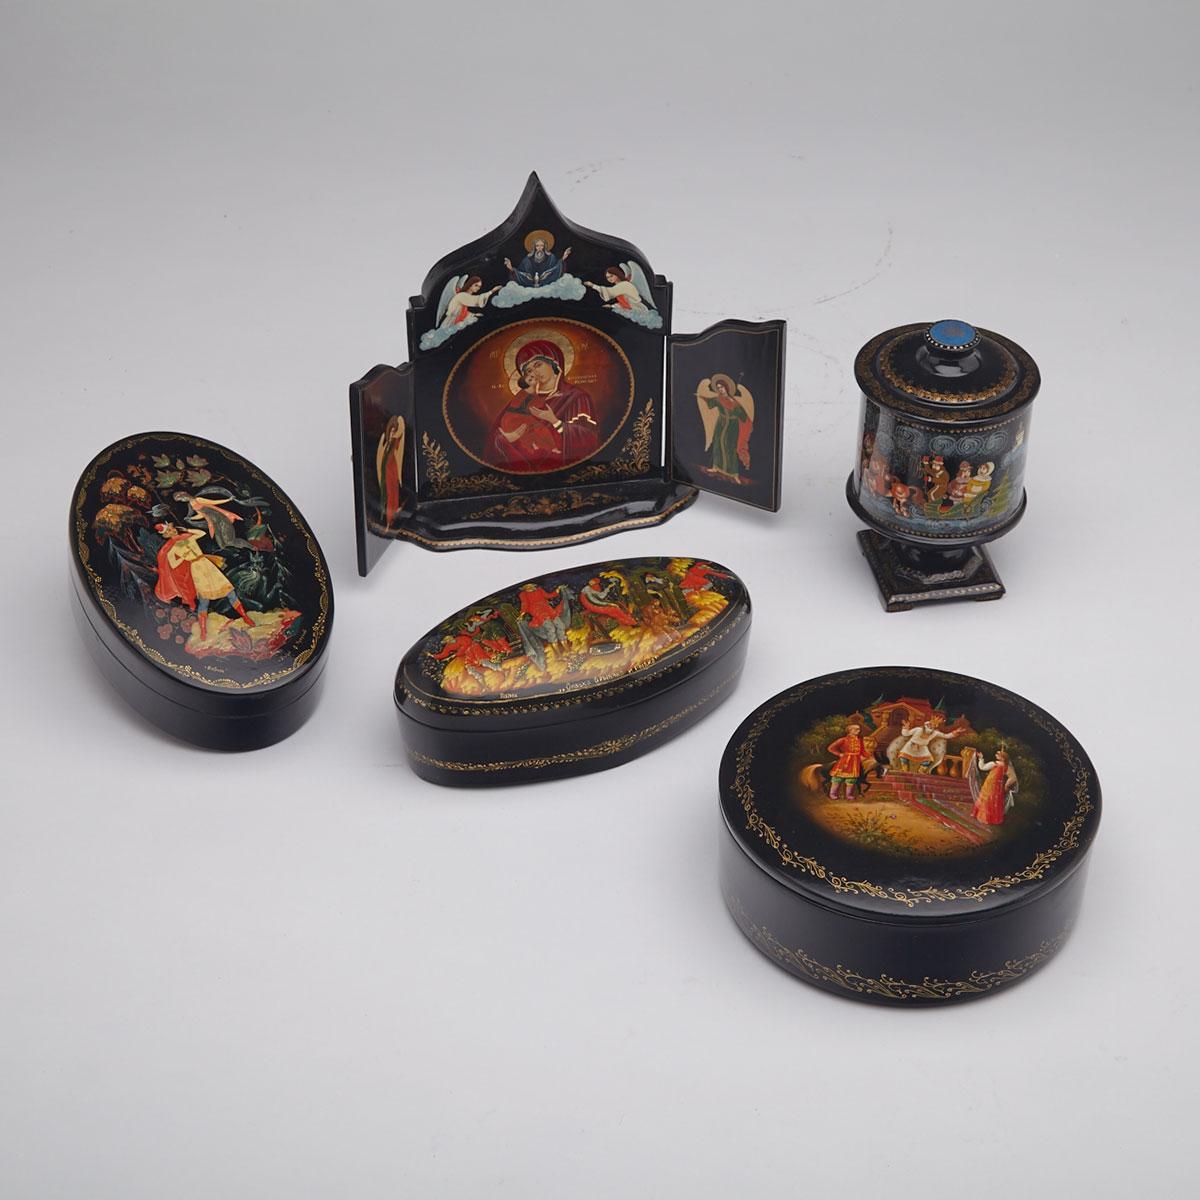 Group of Five Russian Palekh Lacquer Ware Items, late 20th century